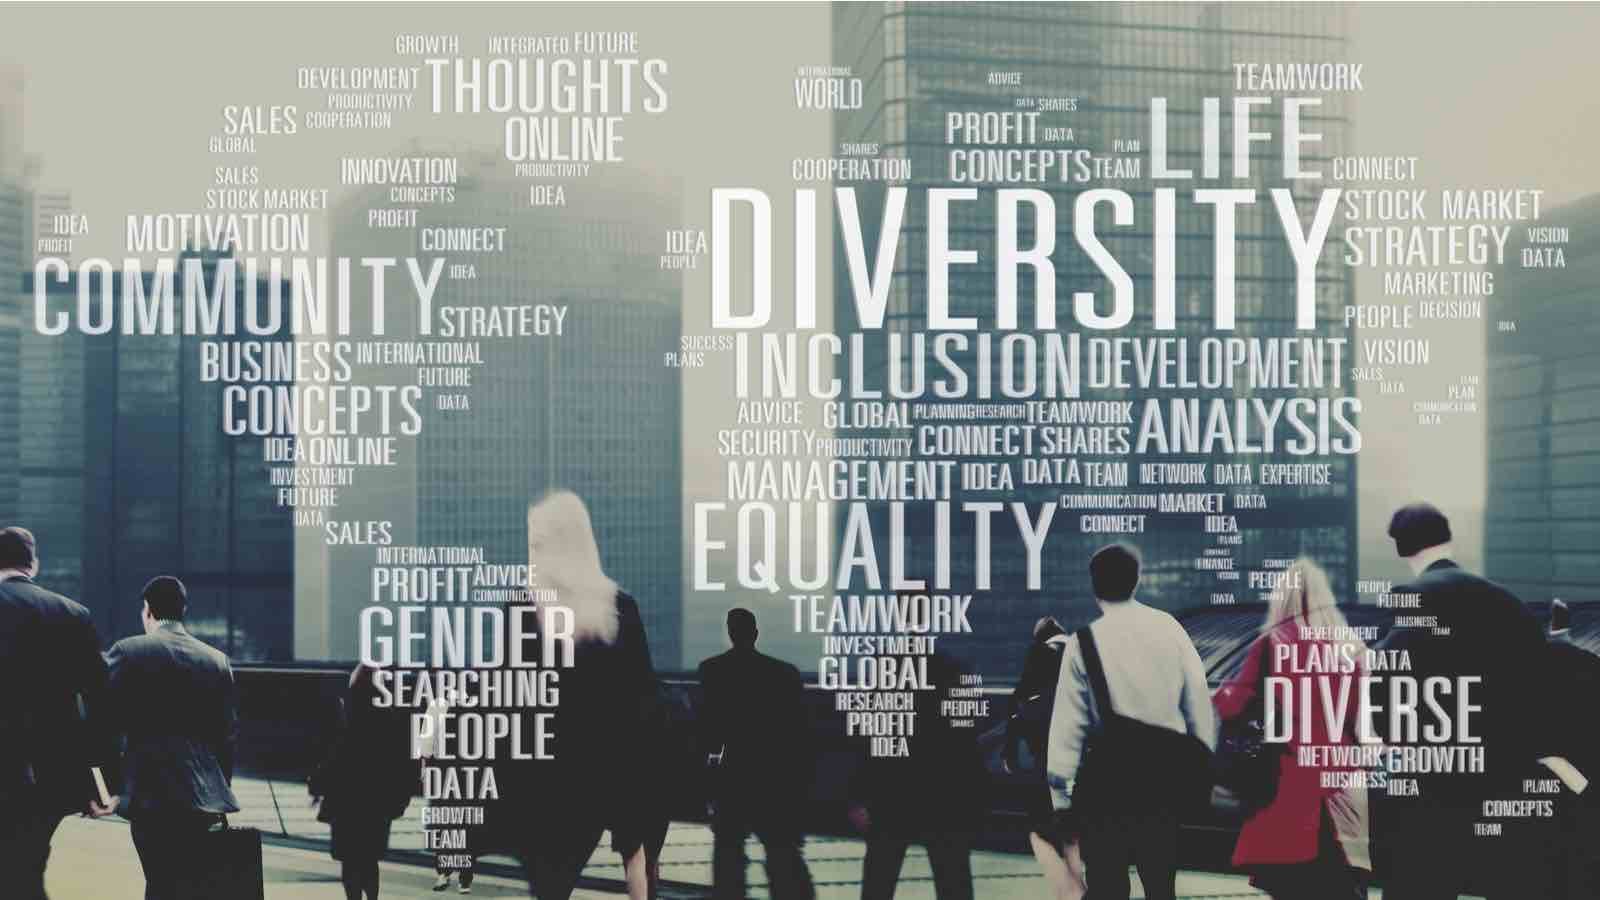 Different words to summarise effective boards e.g. equality, gender, community,  motivation, data